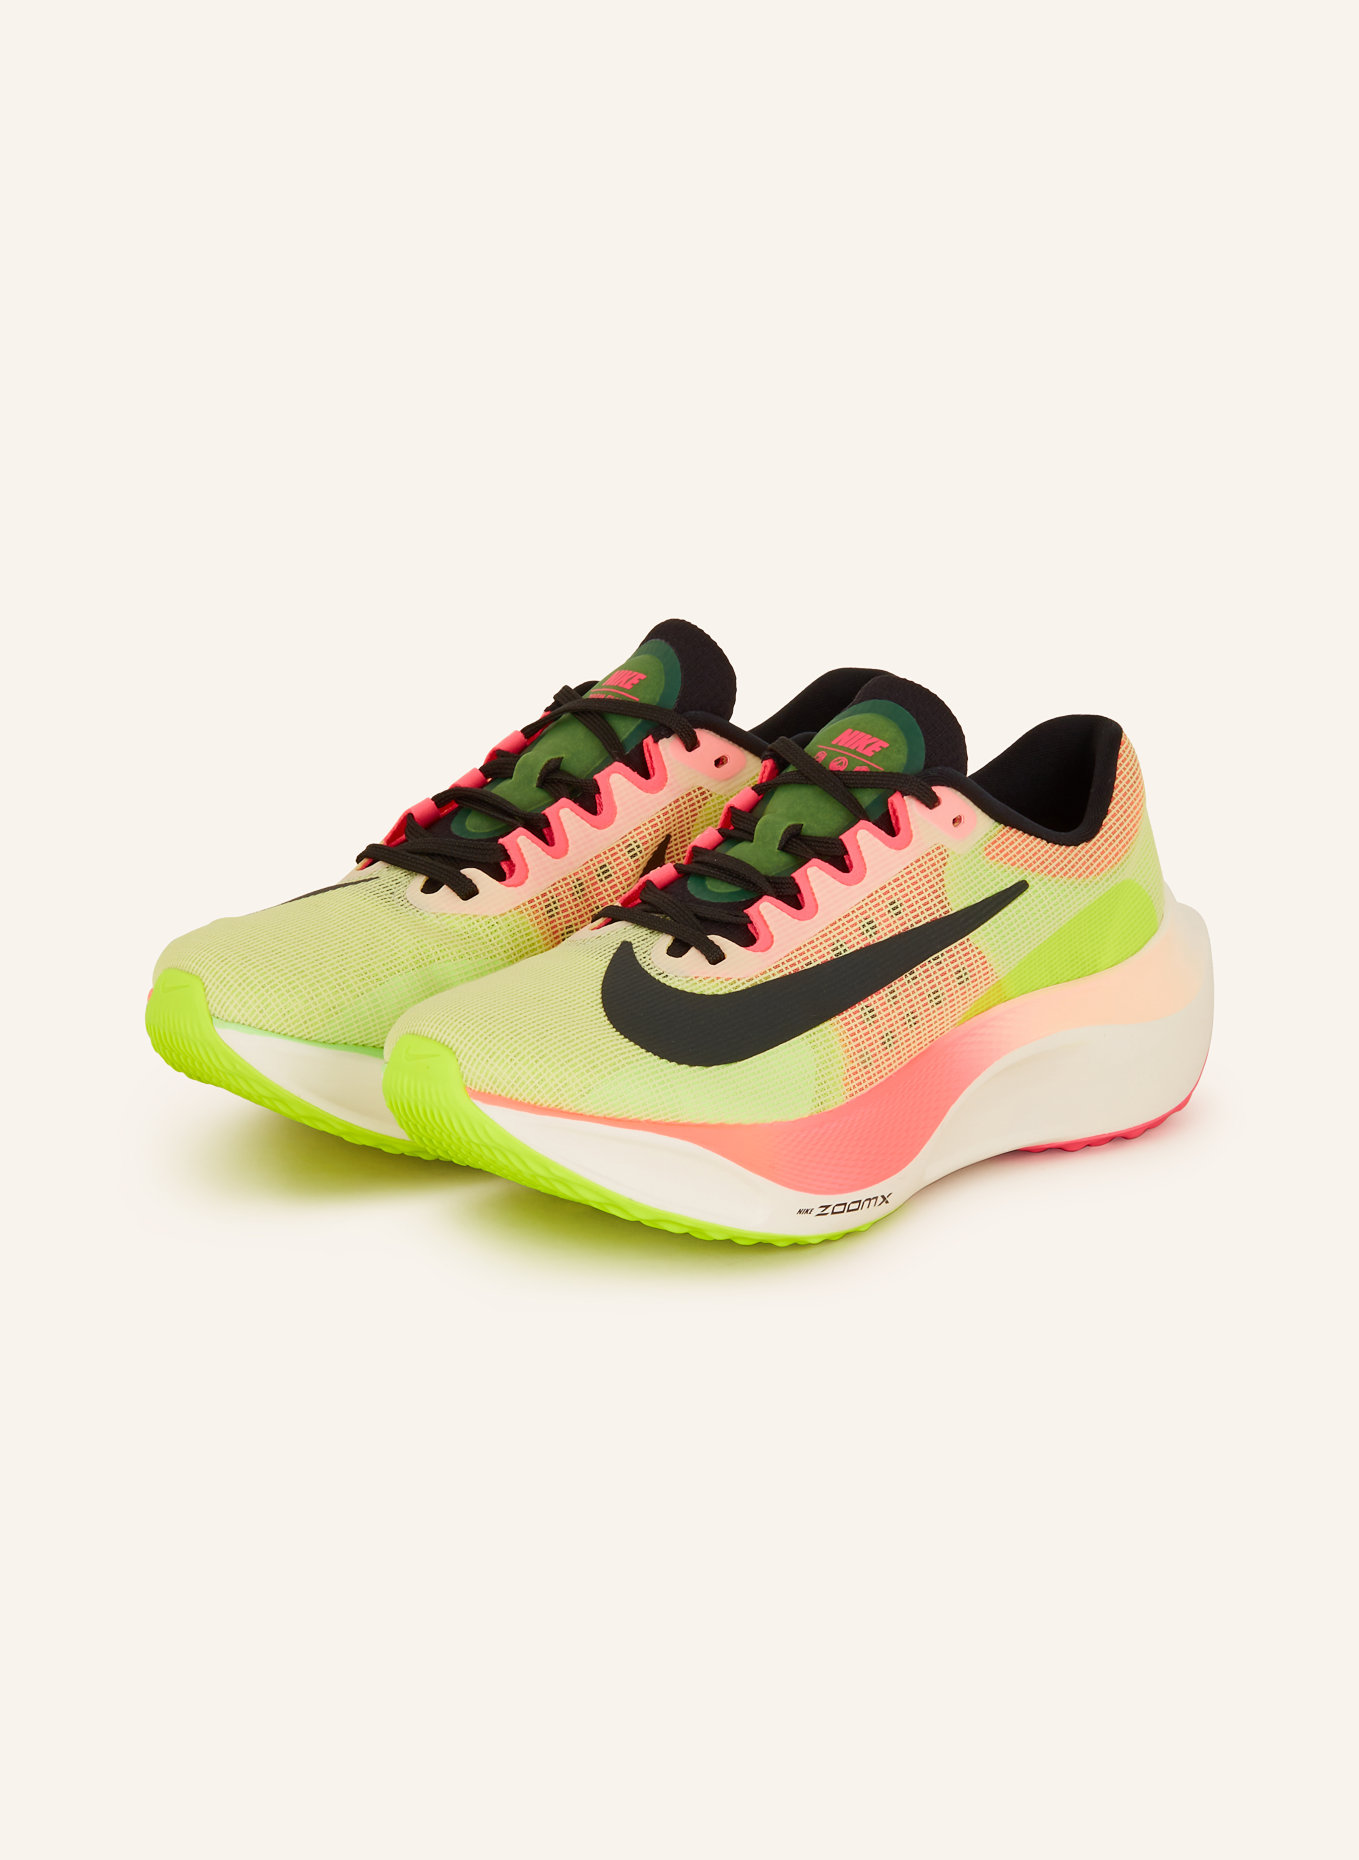 Nike Running shoes ZOOM FLY 5 PREMIUM, Color: NEON YELLOW/ NEON PINK/ BLACK (Image 1)